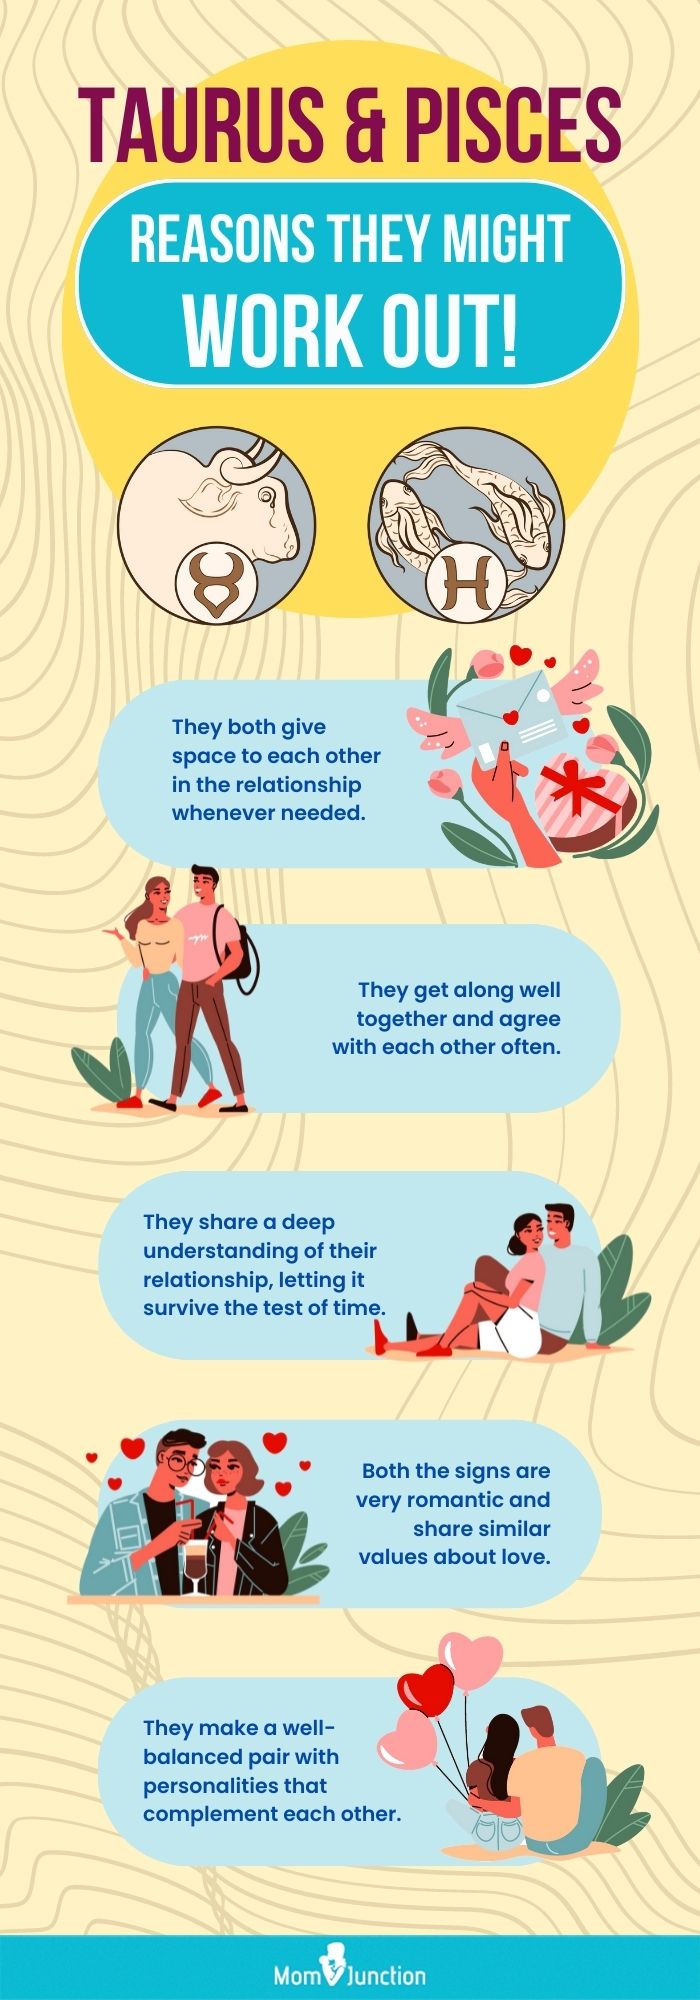 taurus and pisces reasons they might work out [infographic]